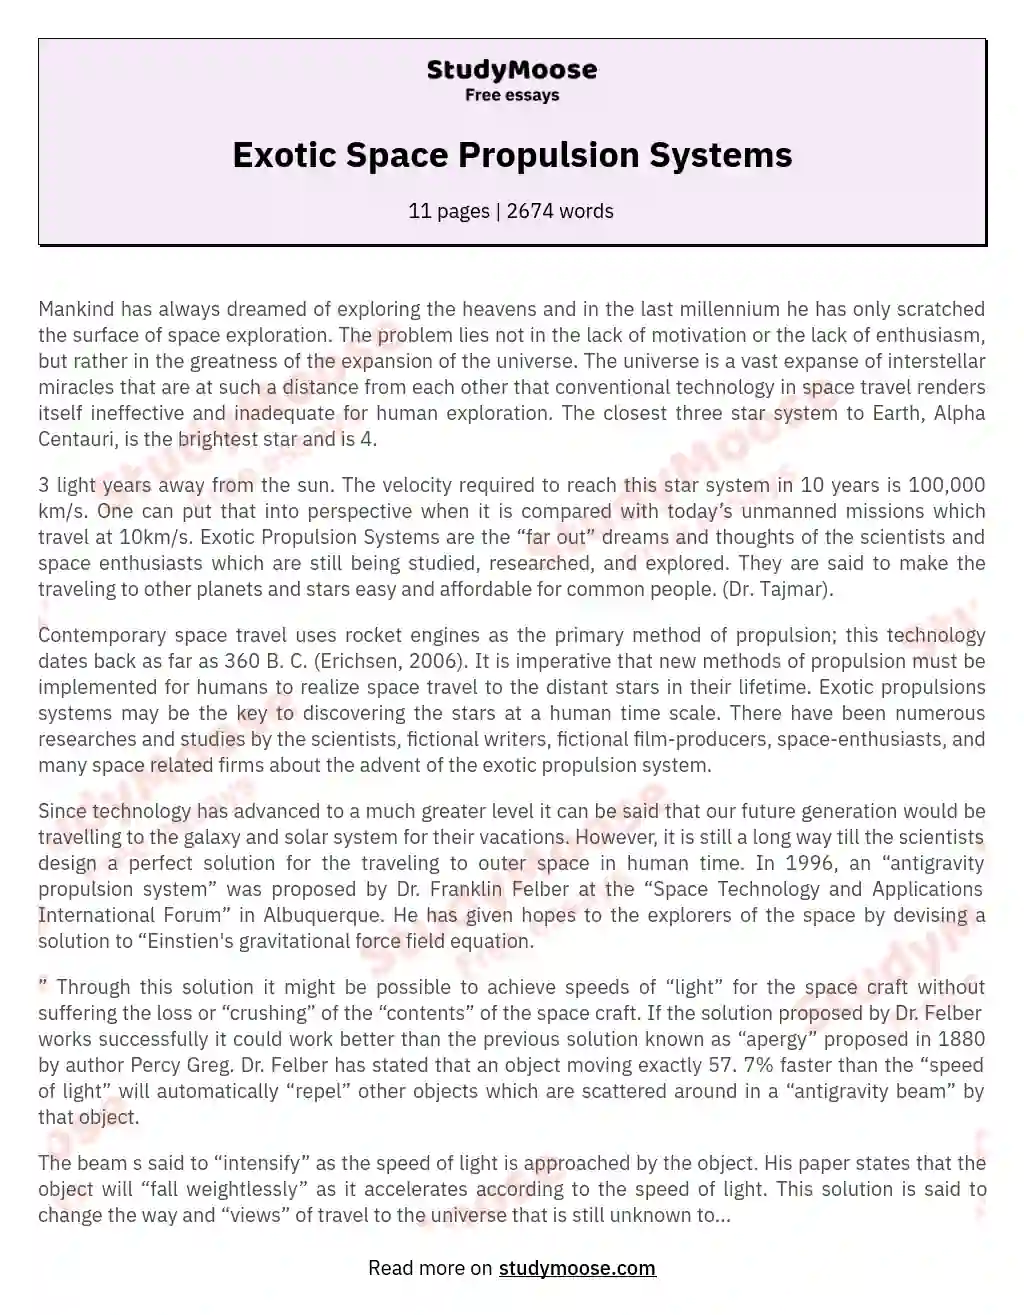 Exotic Space Propulsion Systems essay